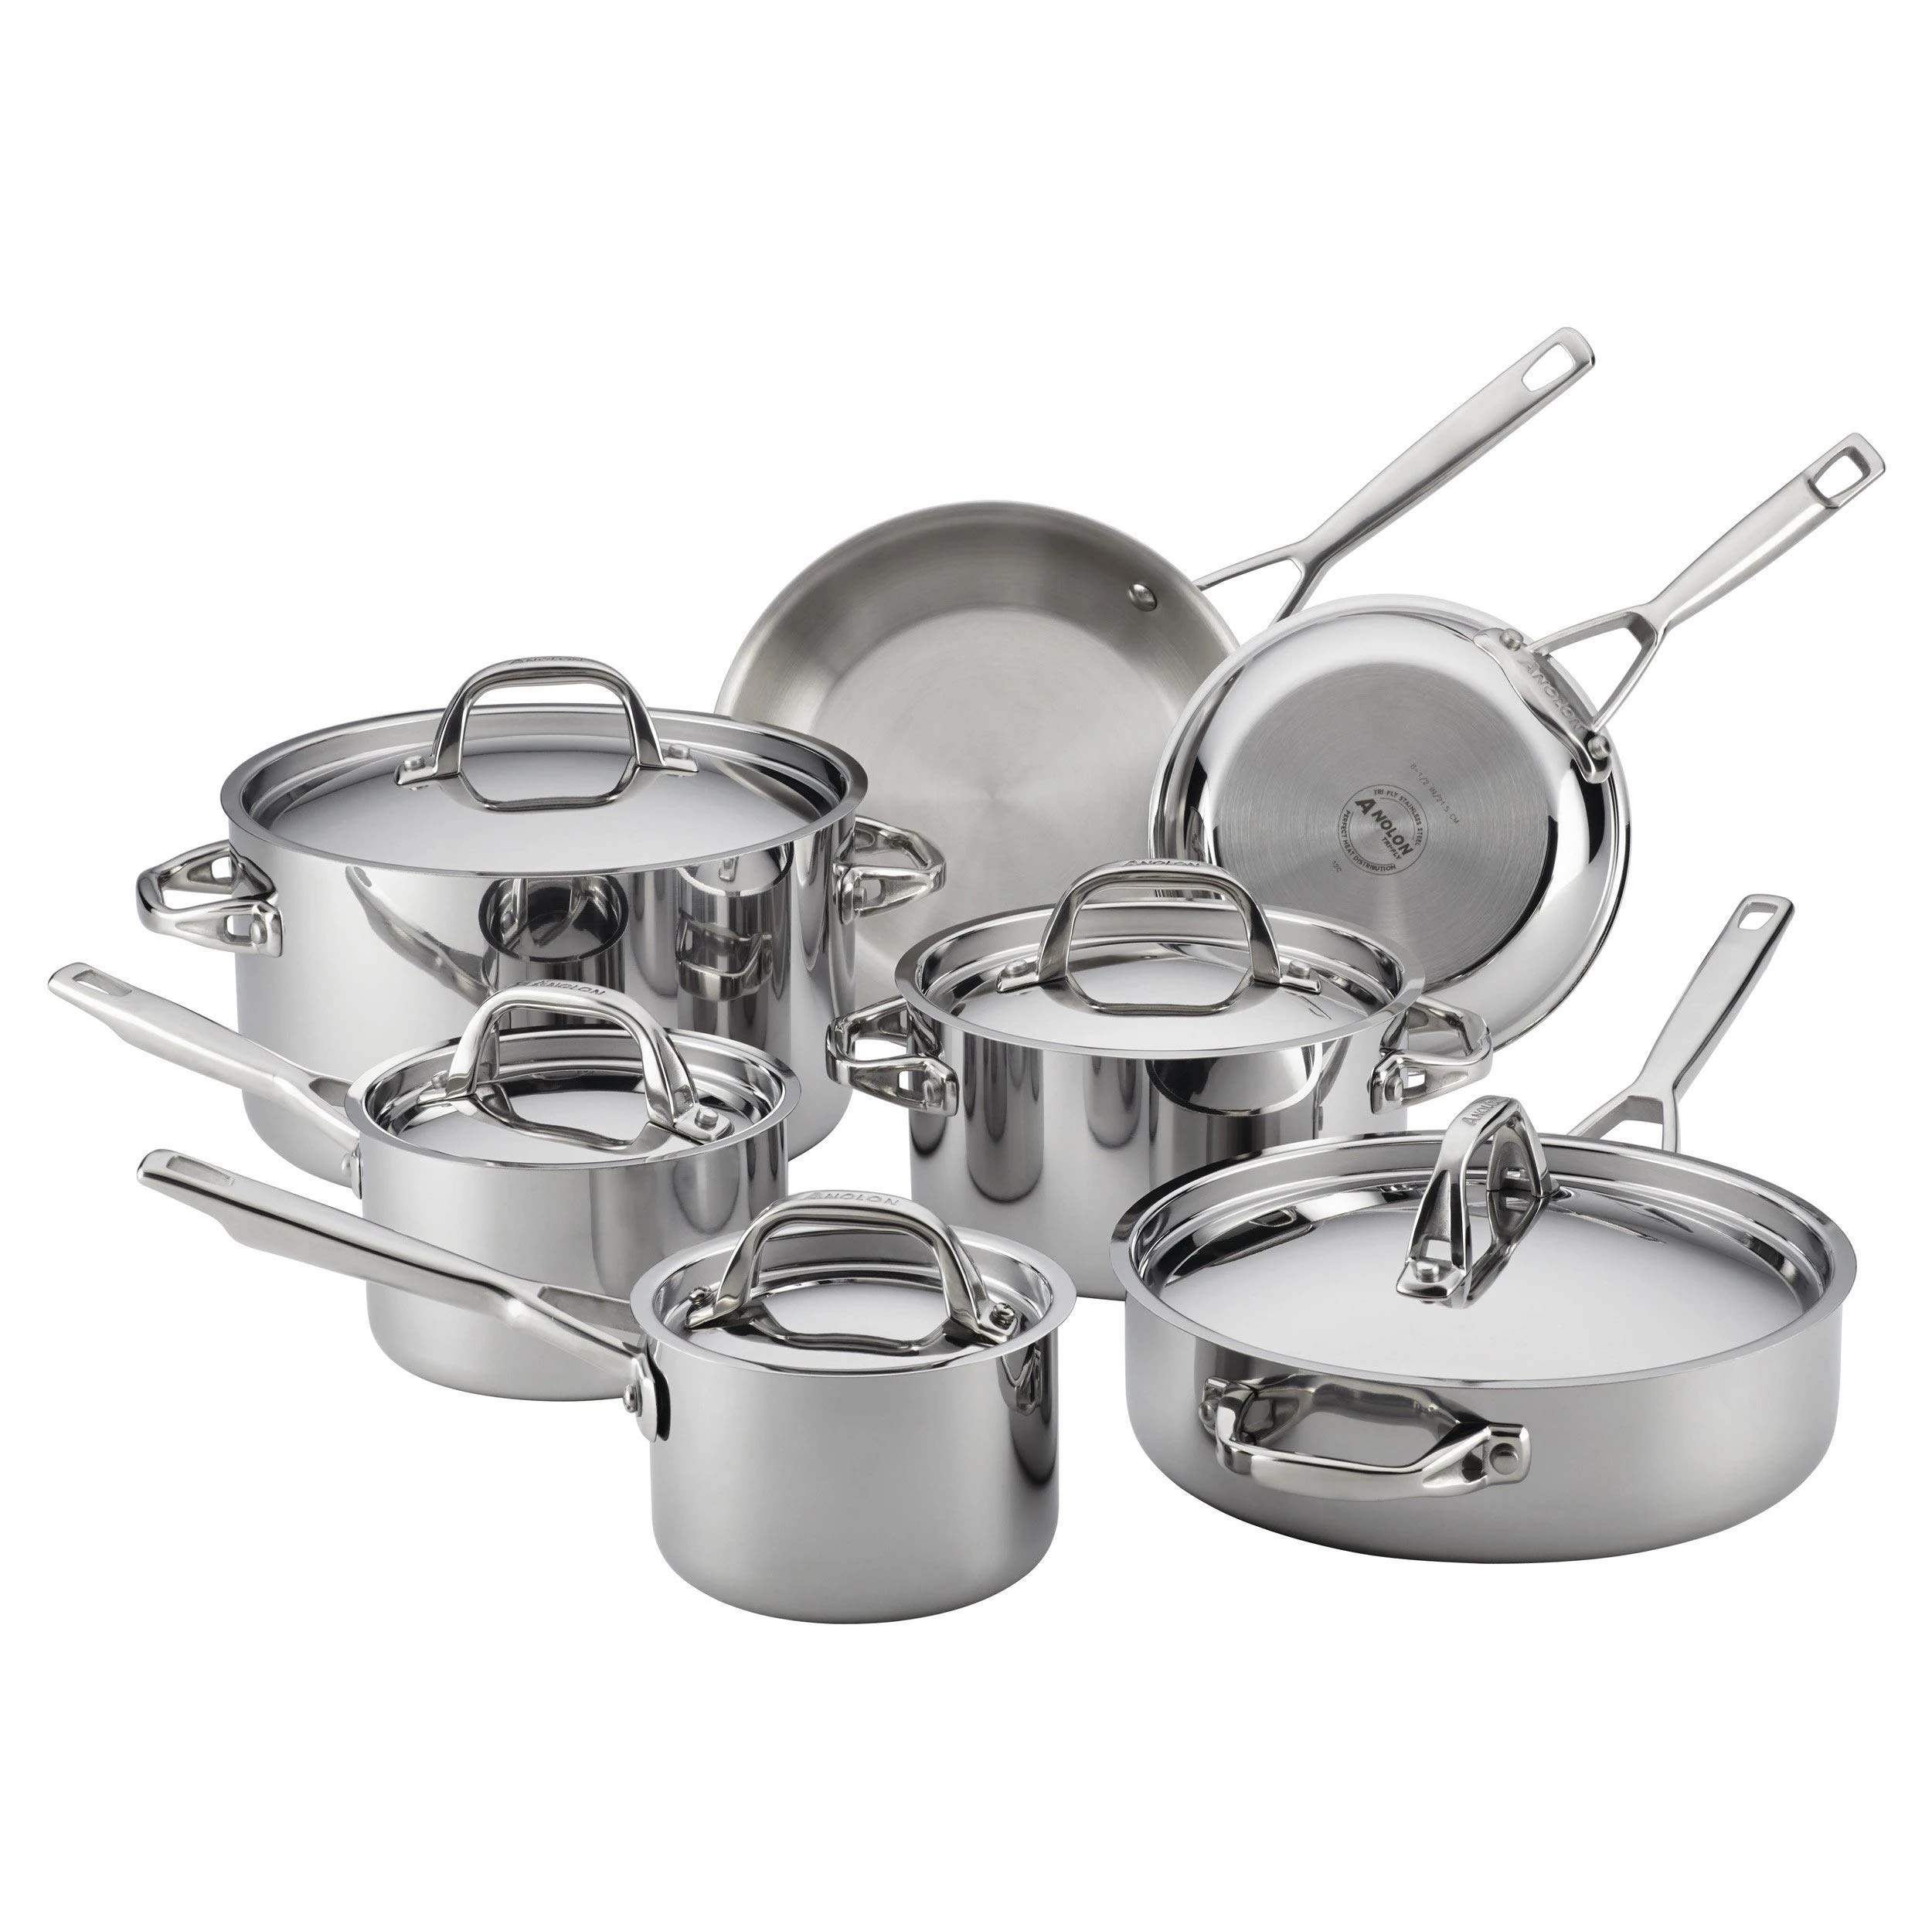 anolon-30822-triply-clad-stainless-steel-cookware-set